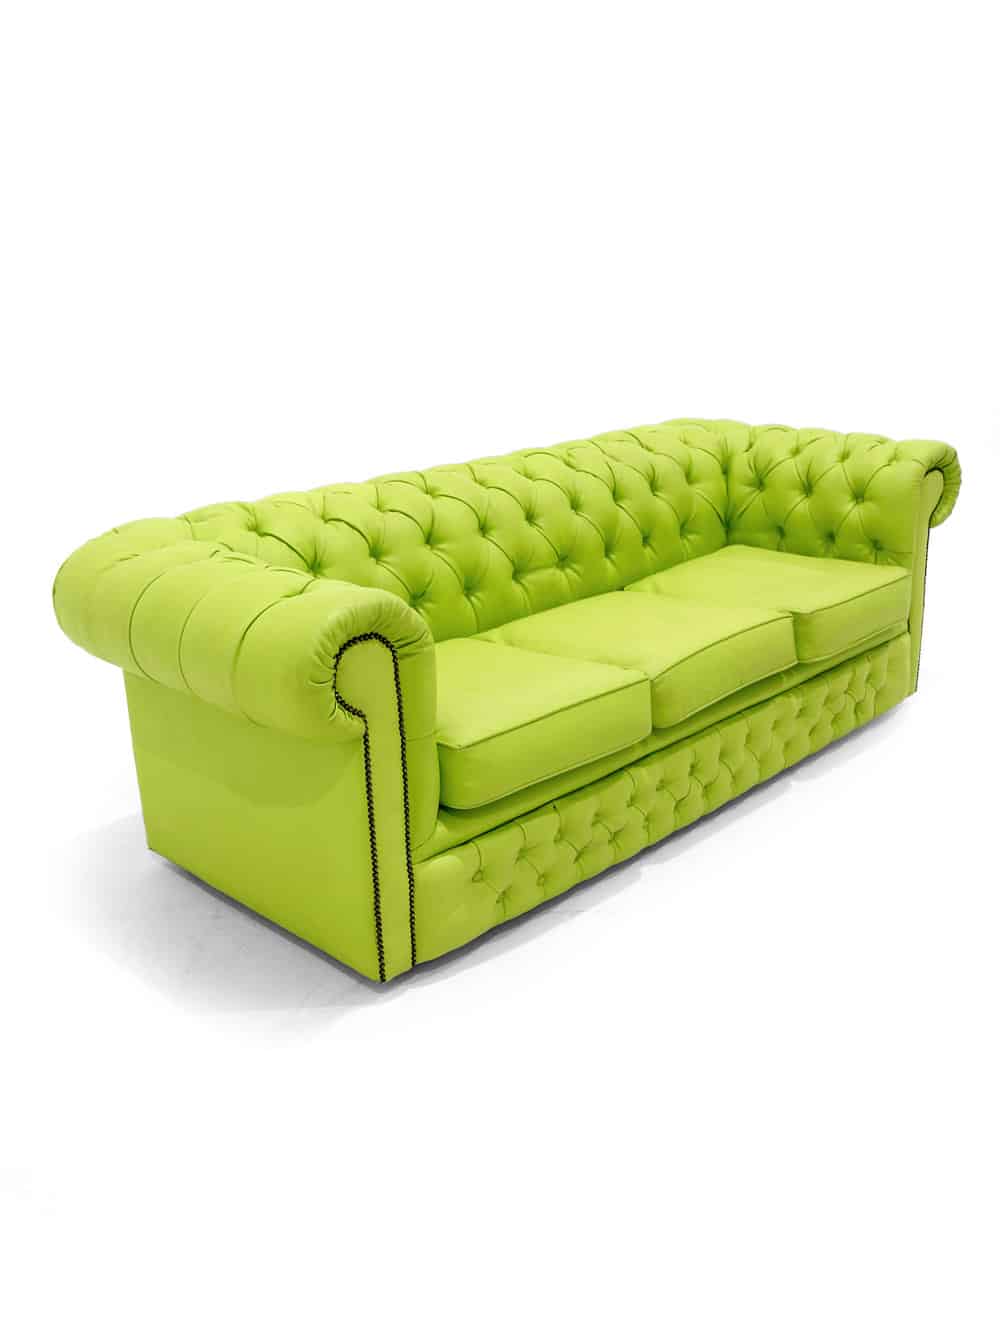 Lime Green Chesterfield 3 Seater Sofa Event Prop Hire Sofa beds not only provide maximum a green chesterfield sofa in one of the front windows for p. event prop hire